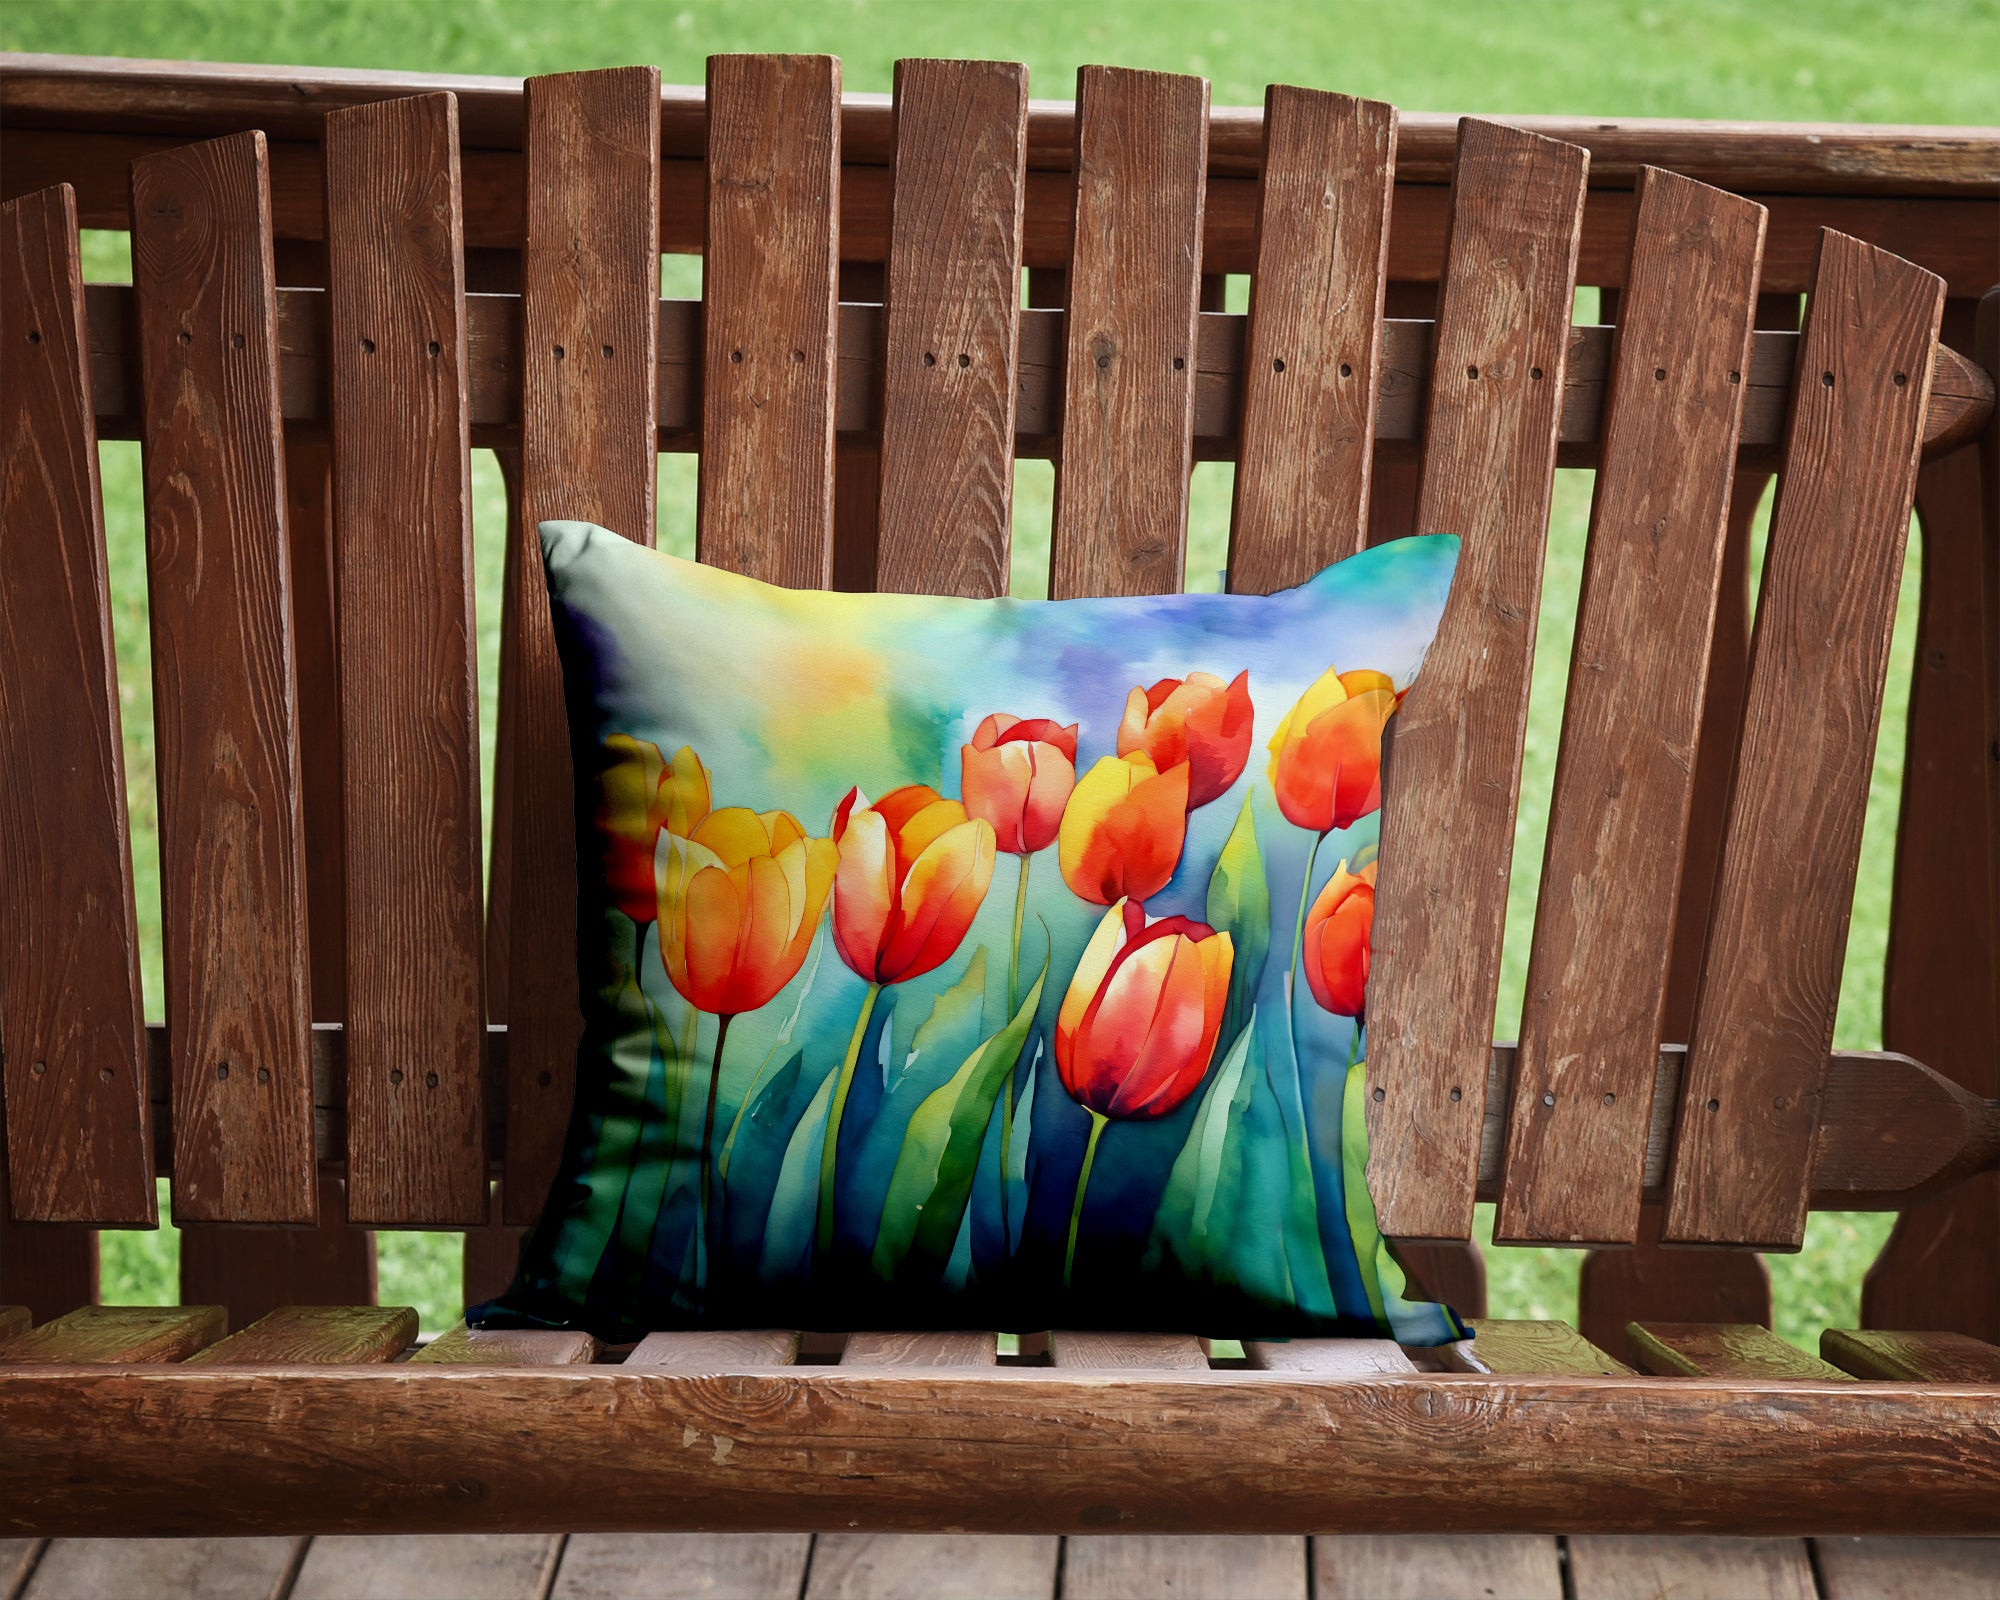 Buy this Tulips in Watercolor Throw Pillow